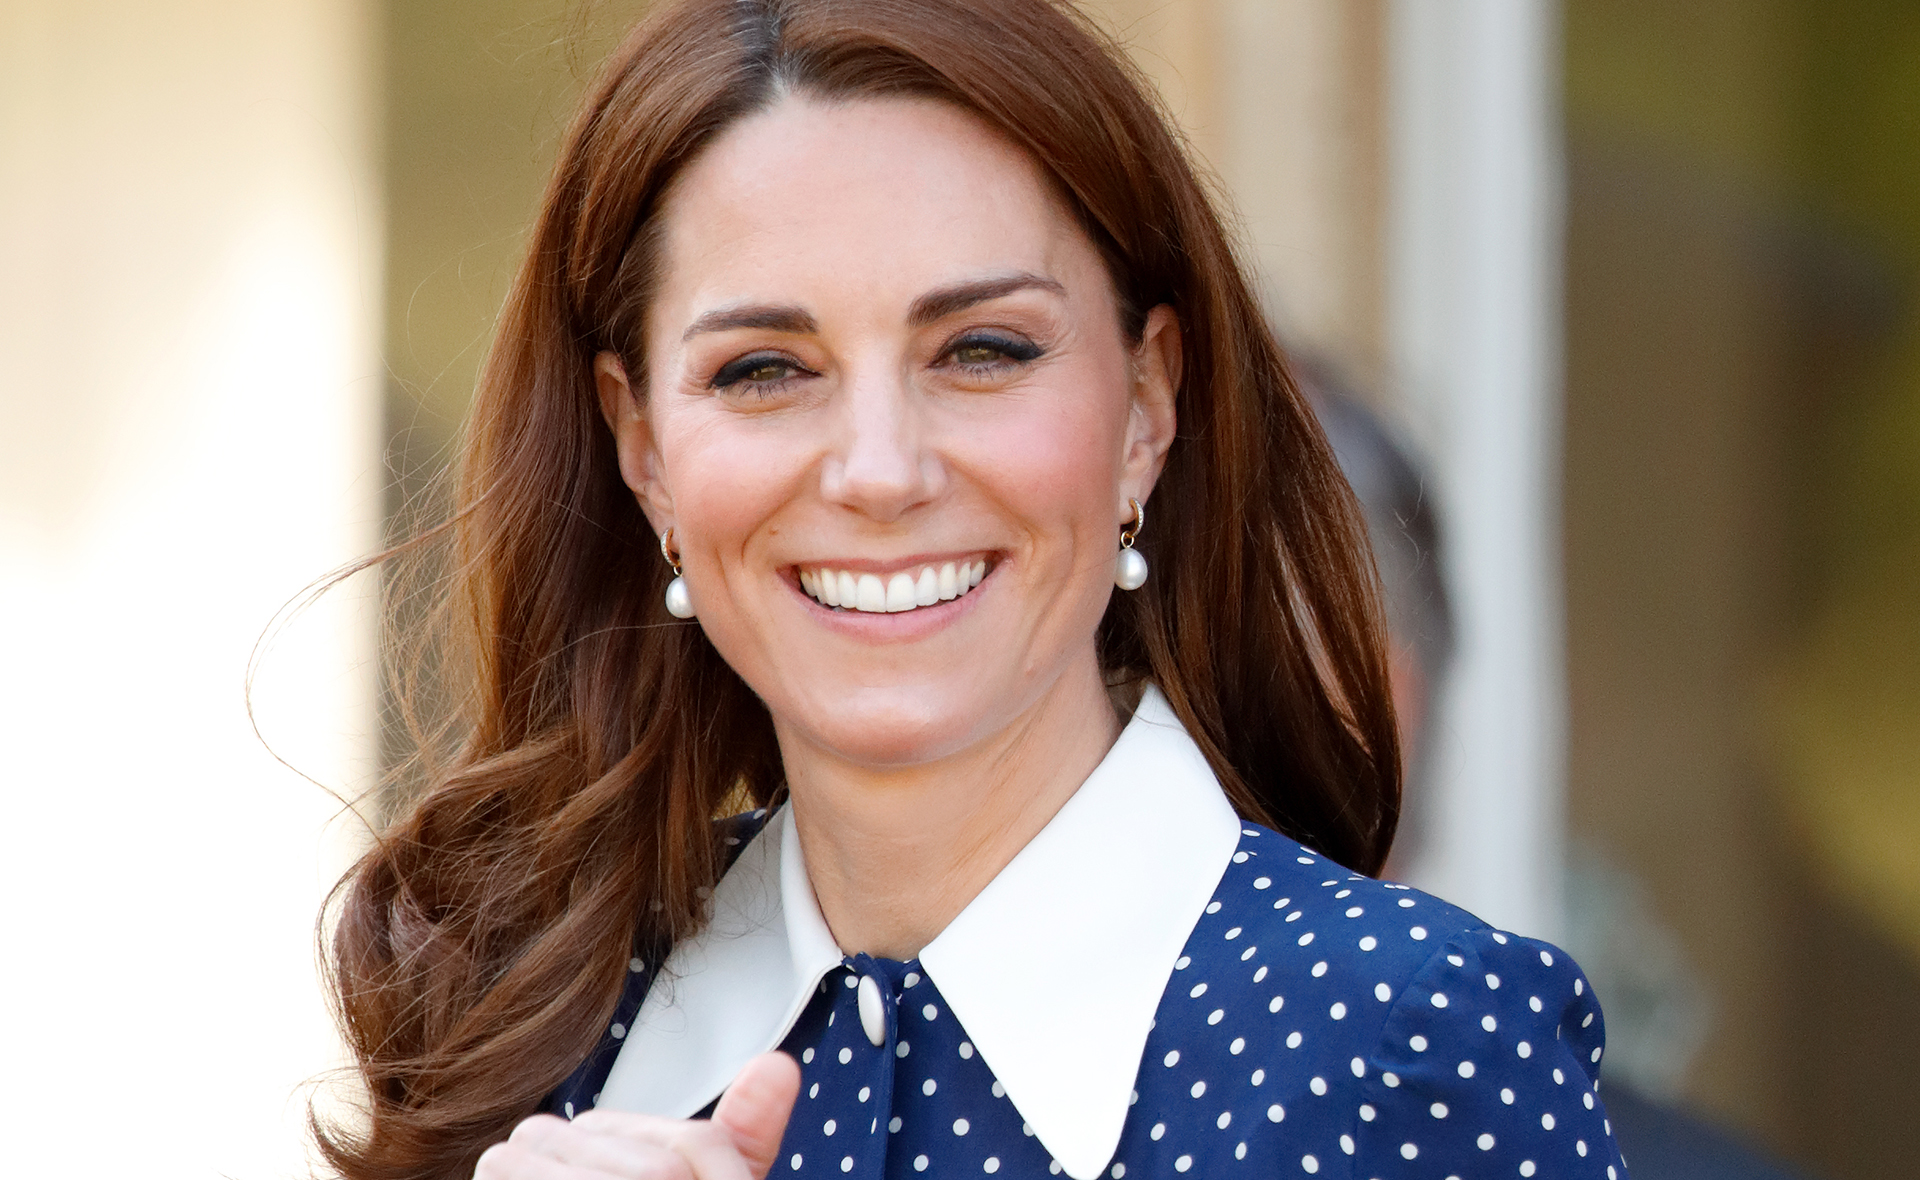 Everyone is convinced Kate Middleton has ‘disappeared’, but what’s the truth?